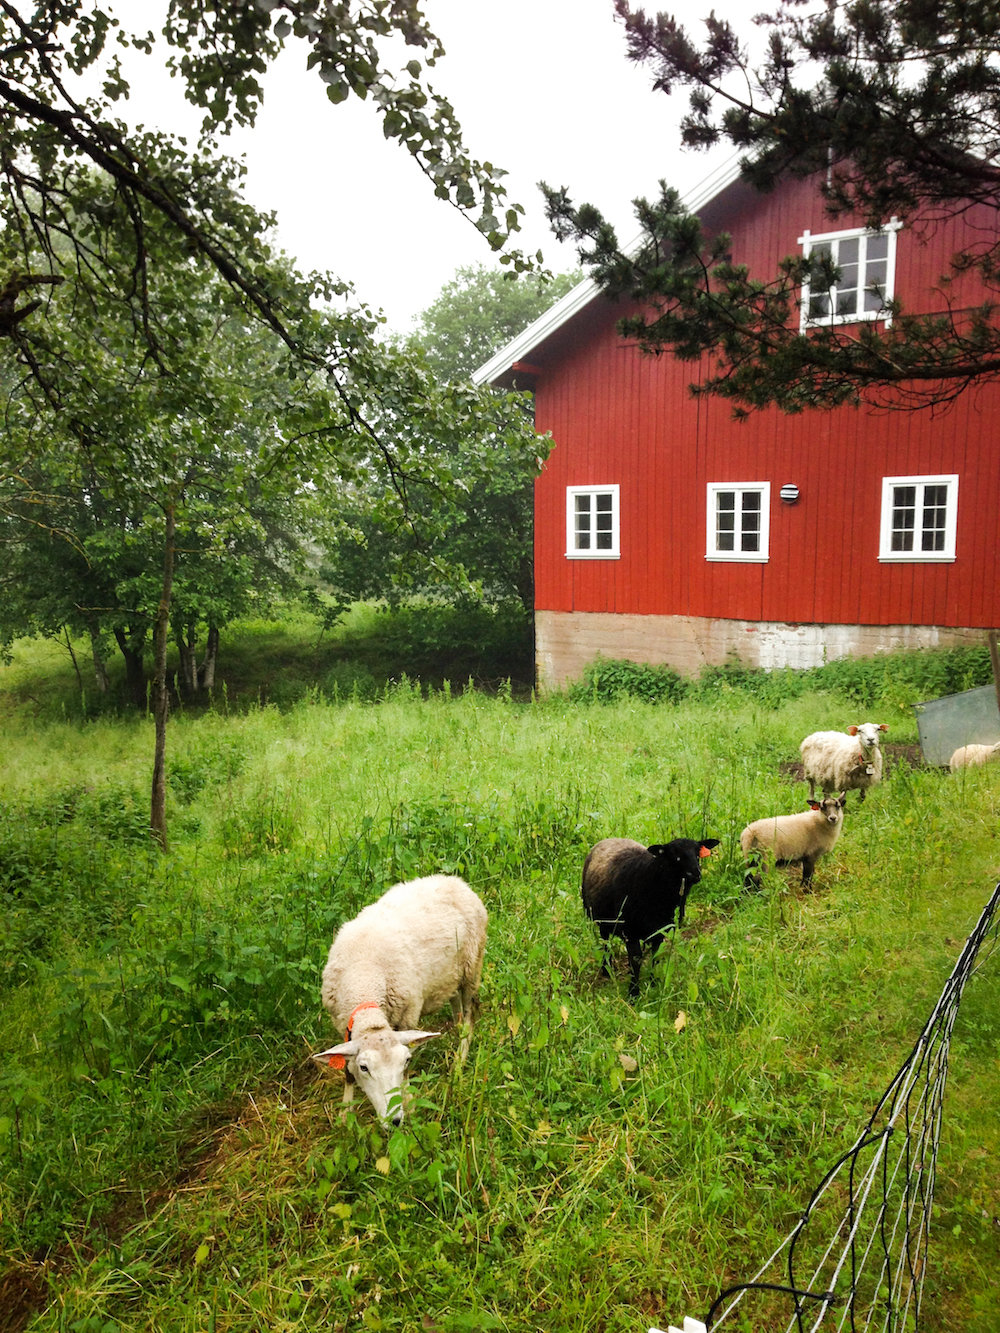 Farmhouse and sheep (Eat Me. Drink Me.)